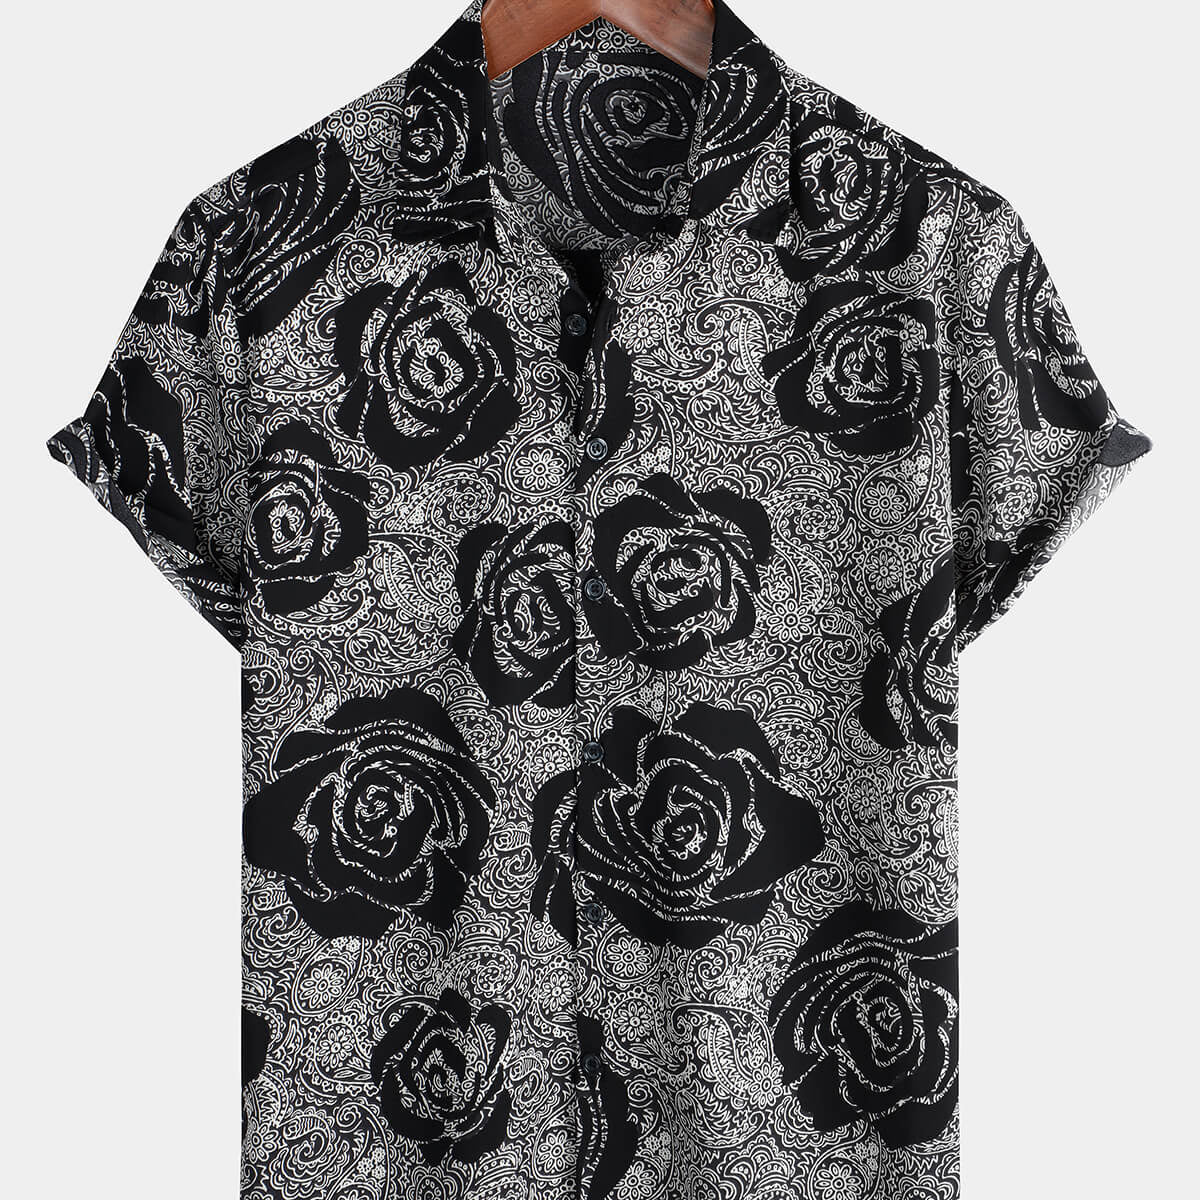 Men's Casual Rose Floral Short Sleeve Button Up Shirt